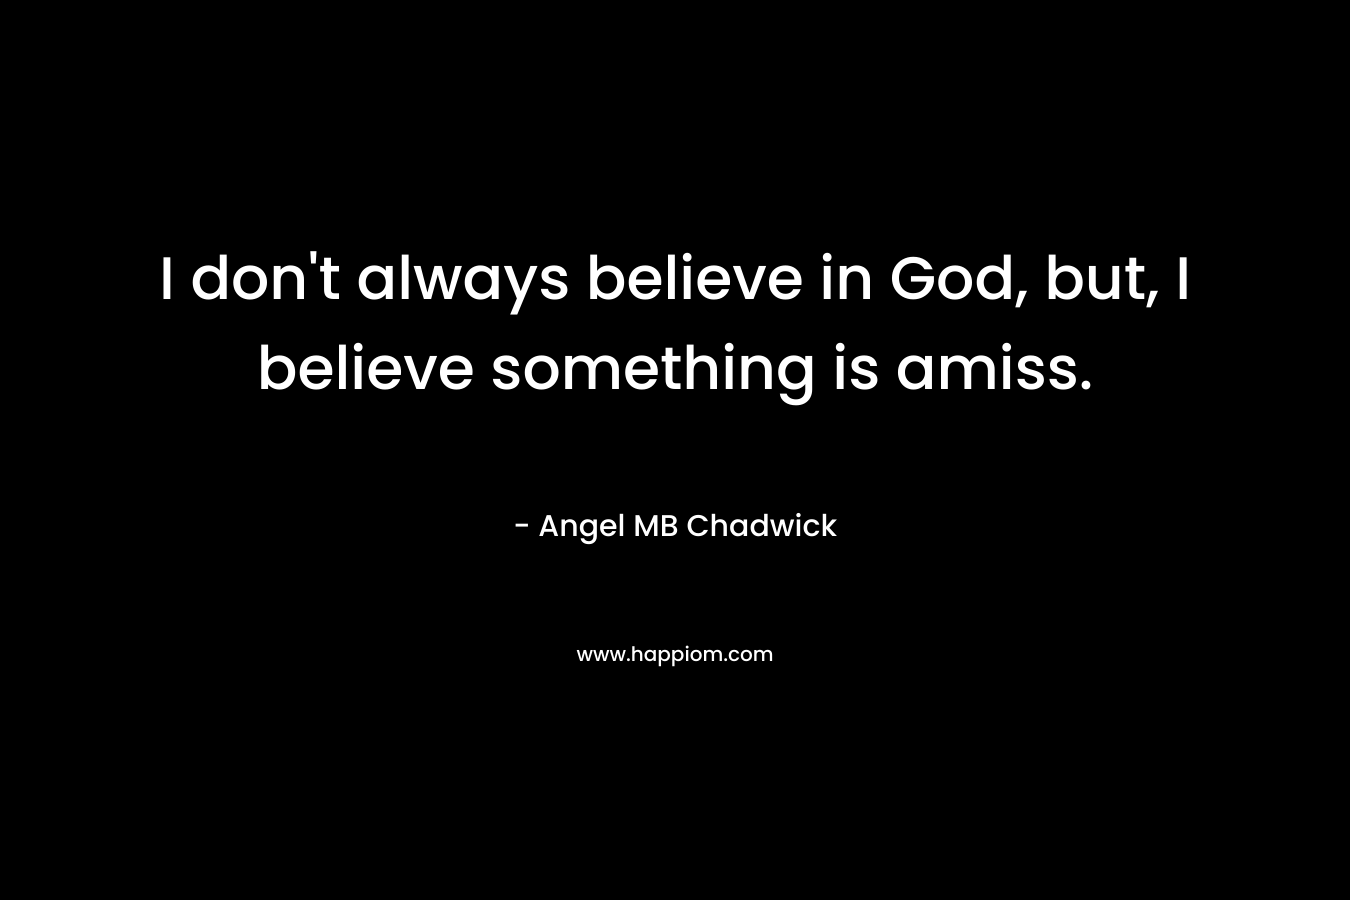 I don’t always believe in God, but, I believe something is amiss. – Angel MB Chadwick